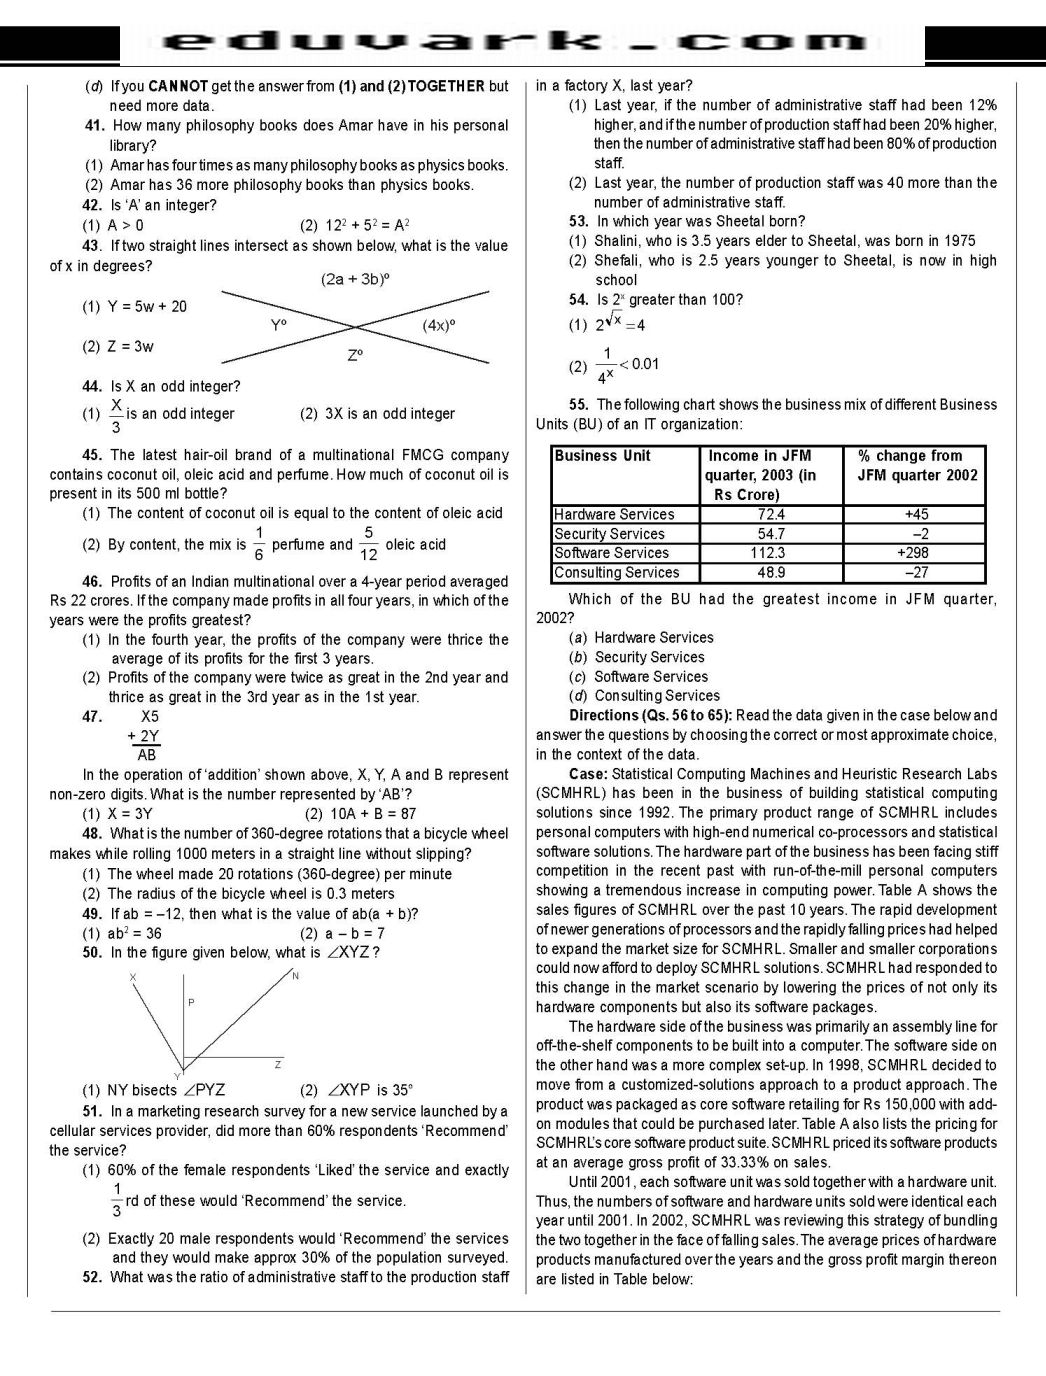 symbiosis-national-aptitude-test-previous-year-question-papers-in-pdf-format-2023-2024-eduvark